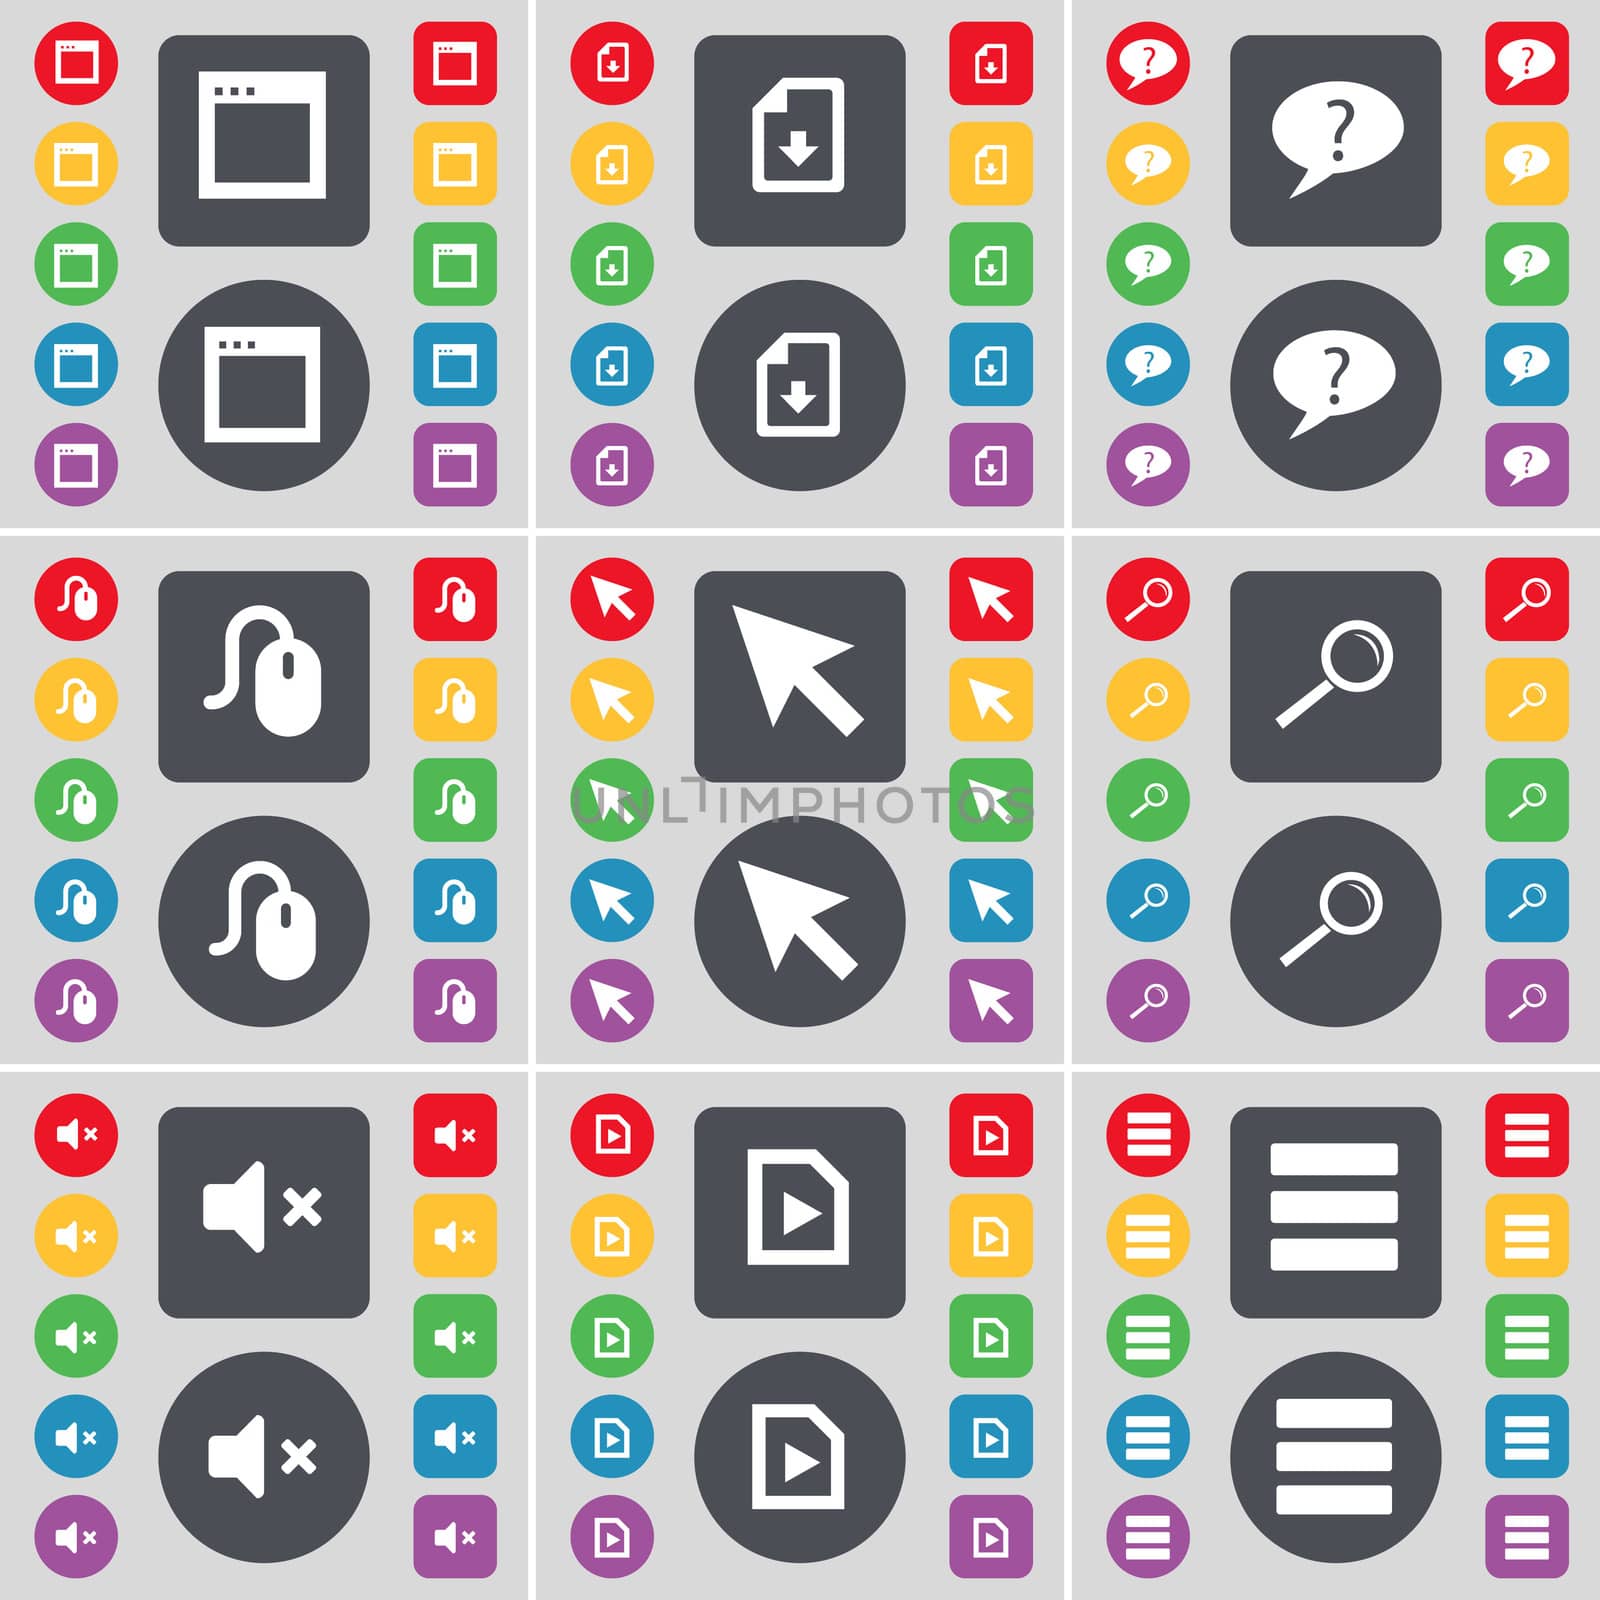 Window, Dowload file, Chat bubble, Mouse, Cursor, Magnifying glass, Mute, Media file, Apps icon symbol. A large set of flat, colored buttons for your design.  by serhii_lohvyniuk